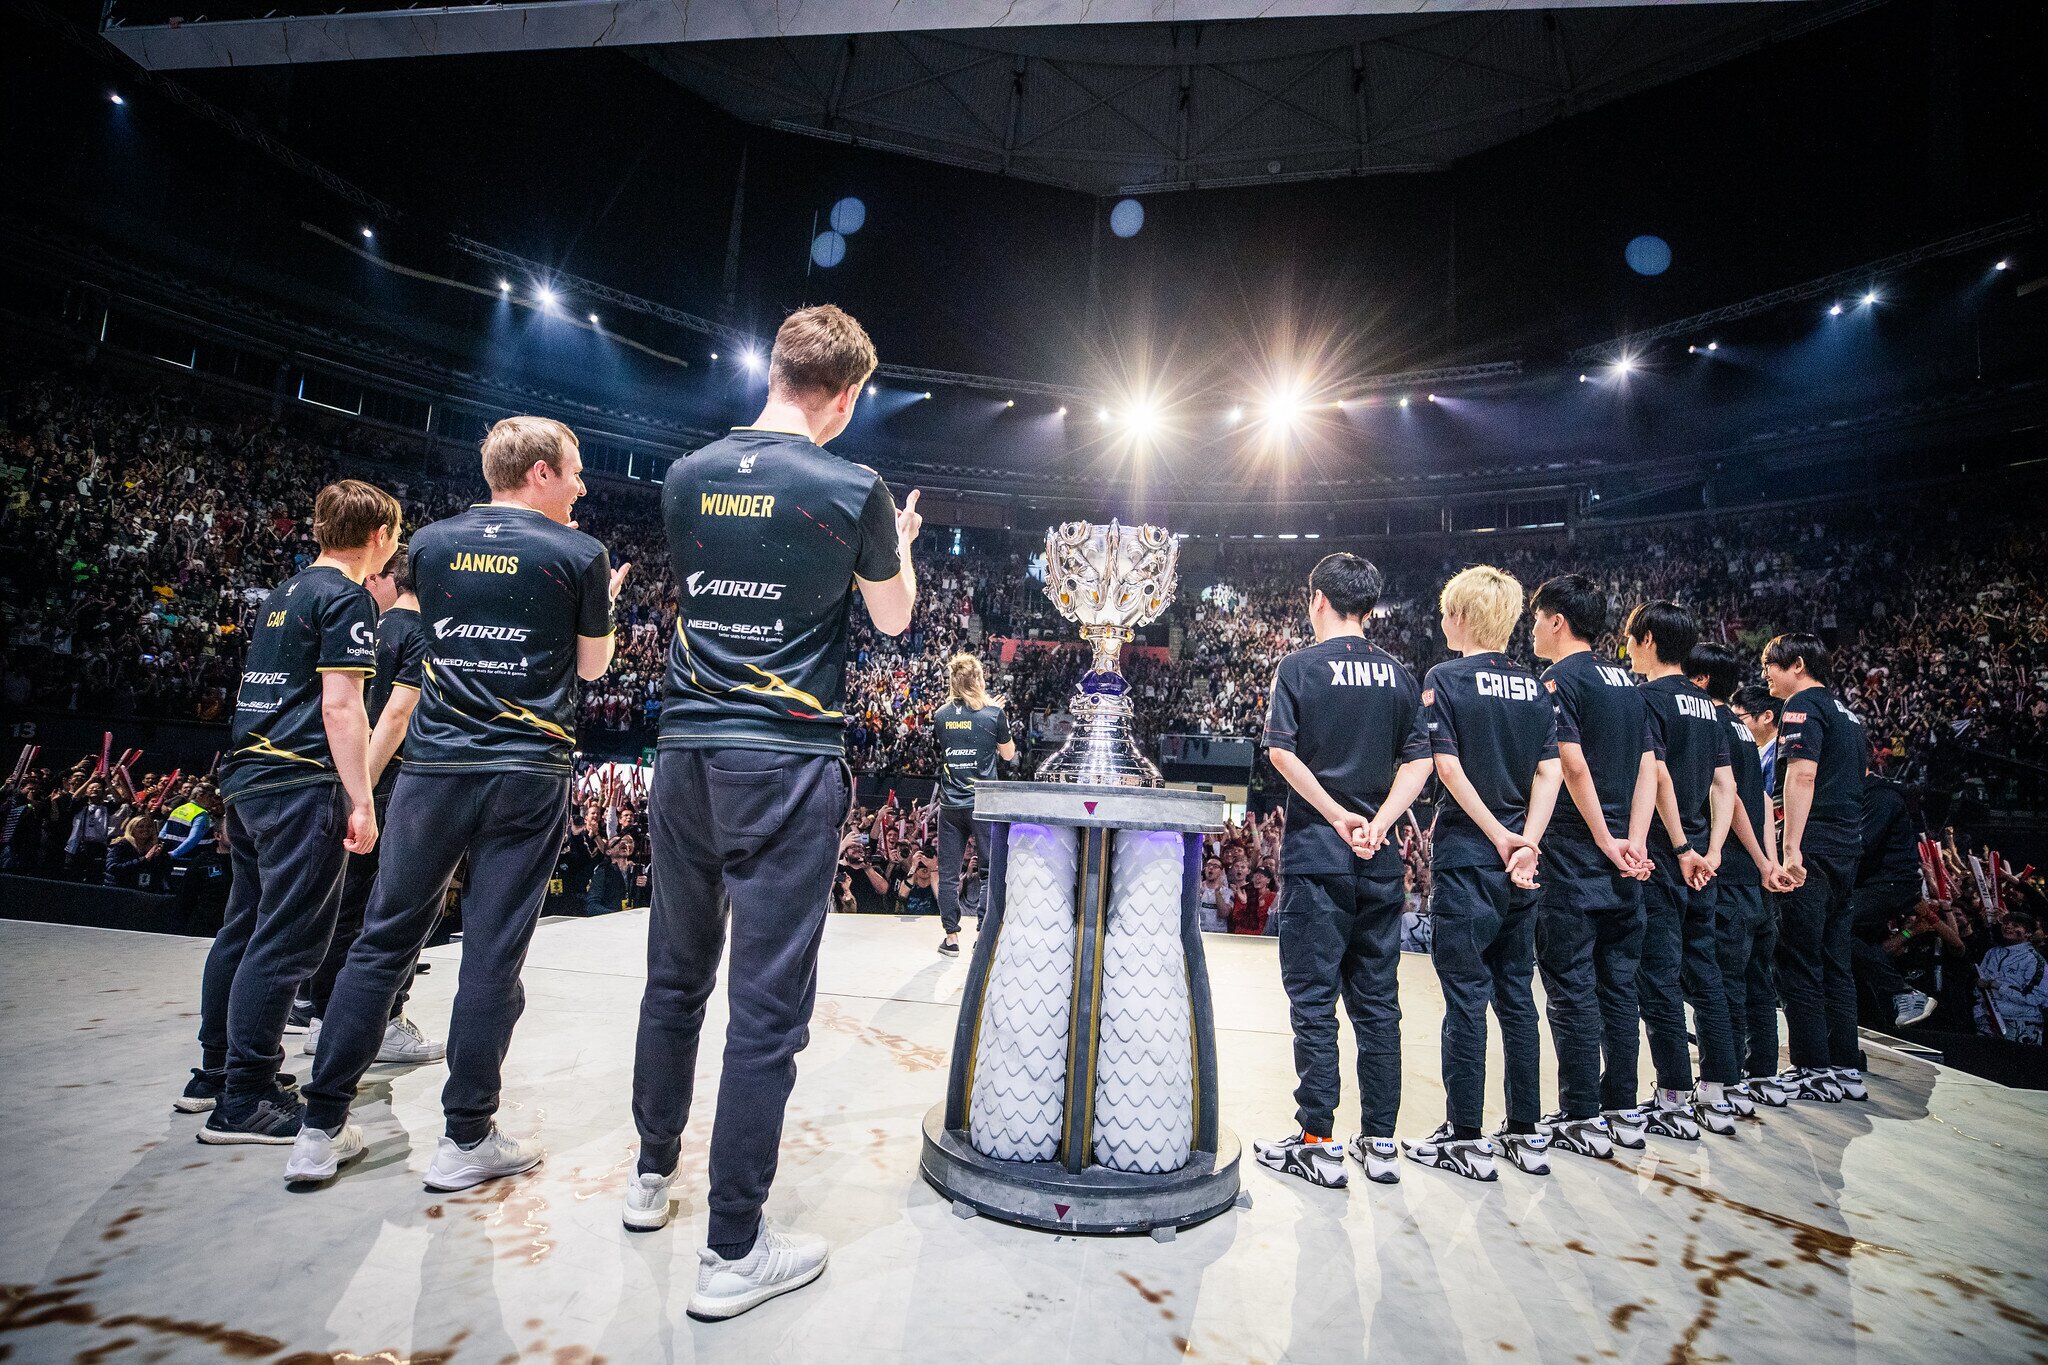 G2 and FunPlus Phoenix face off in one of the most interesting Worlds finals we have ever seen (Photo via Michal Konkol/Riot Games)